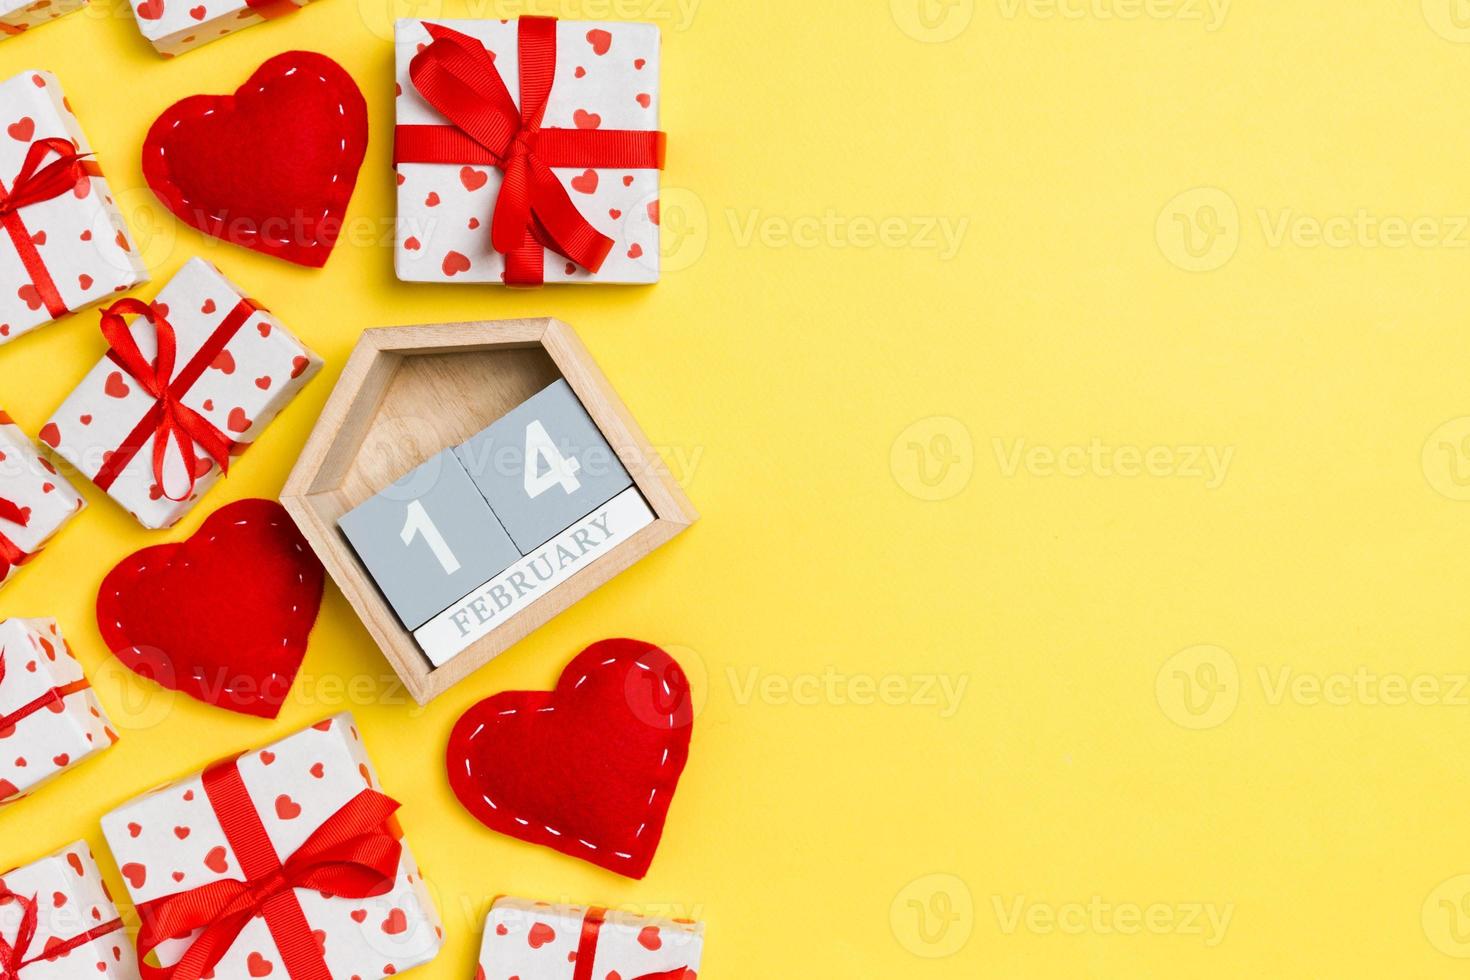 Top view of gift boxes, wooden calendar and red textile hearts on colorful background. The fourteenth of february. St Valentine's day concept with copy space photo